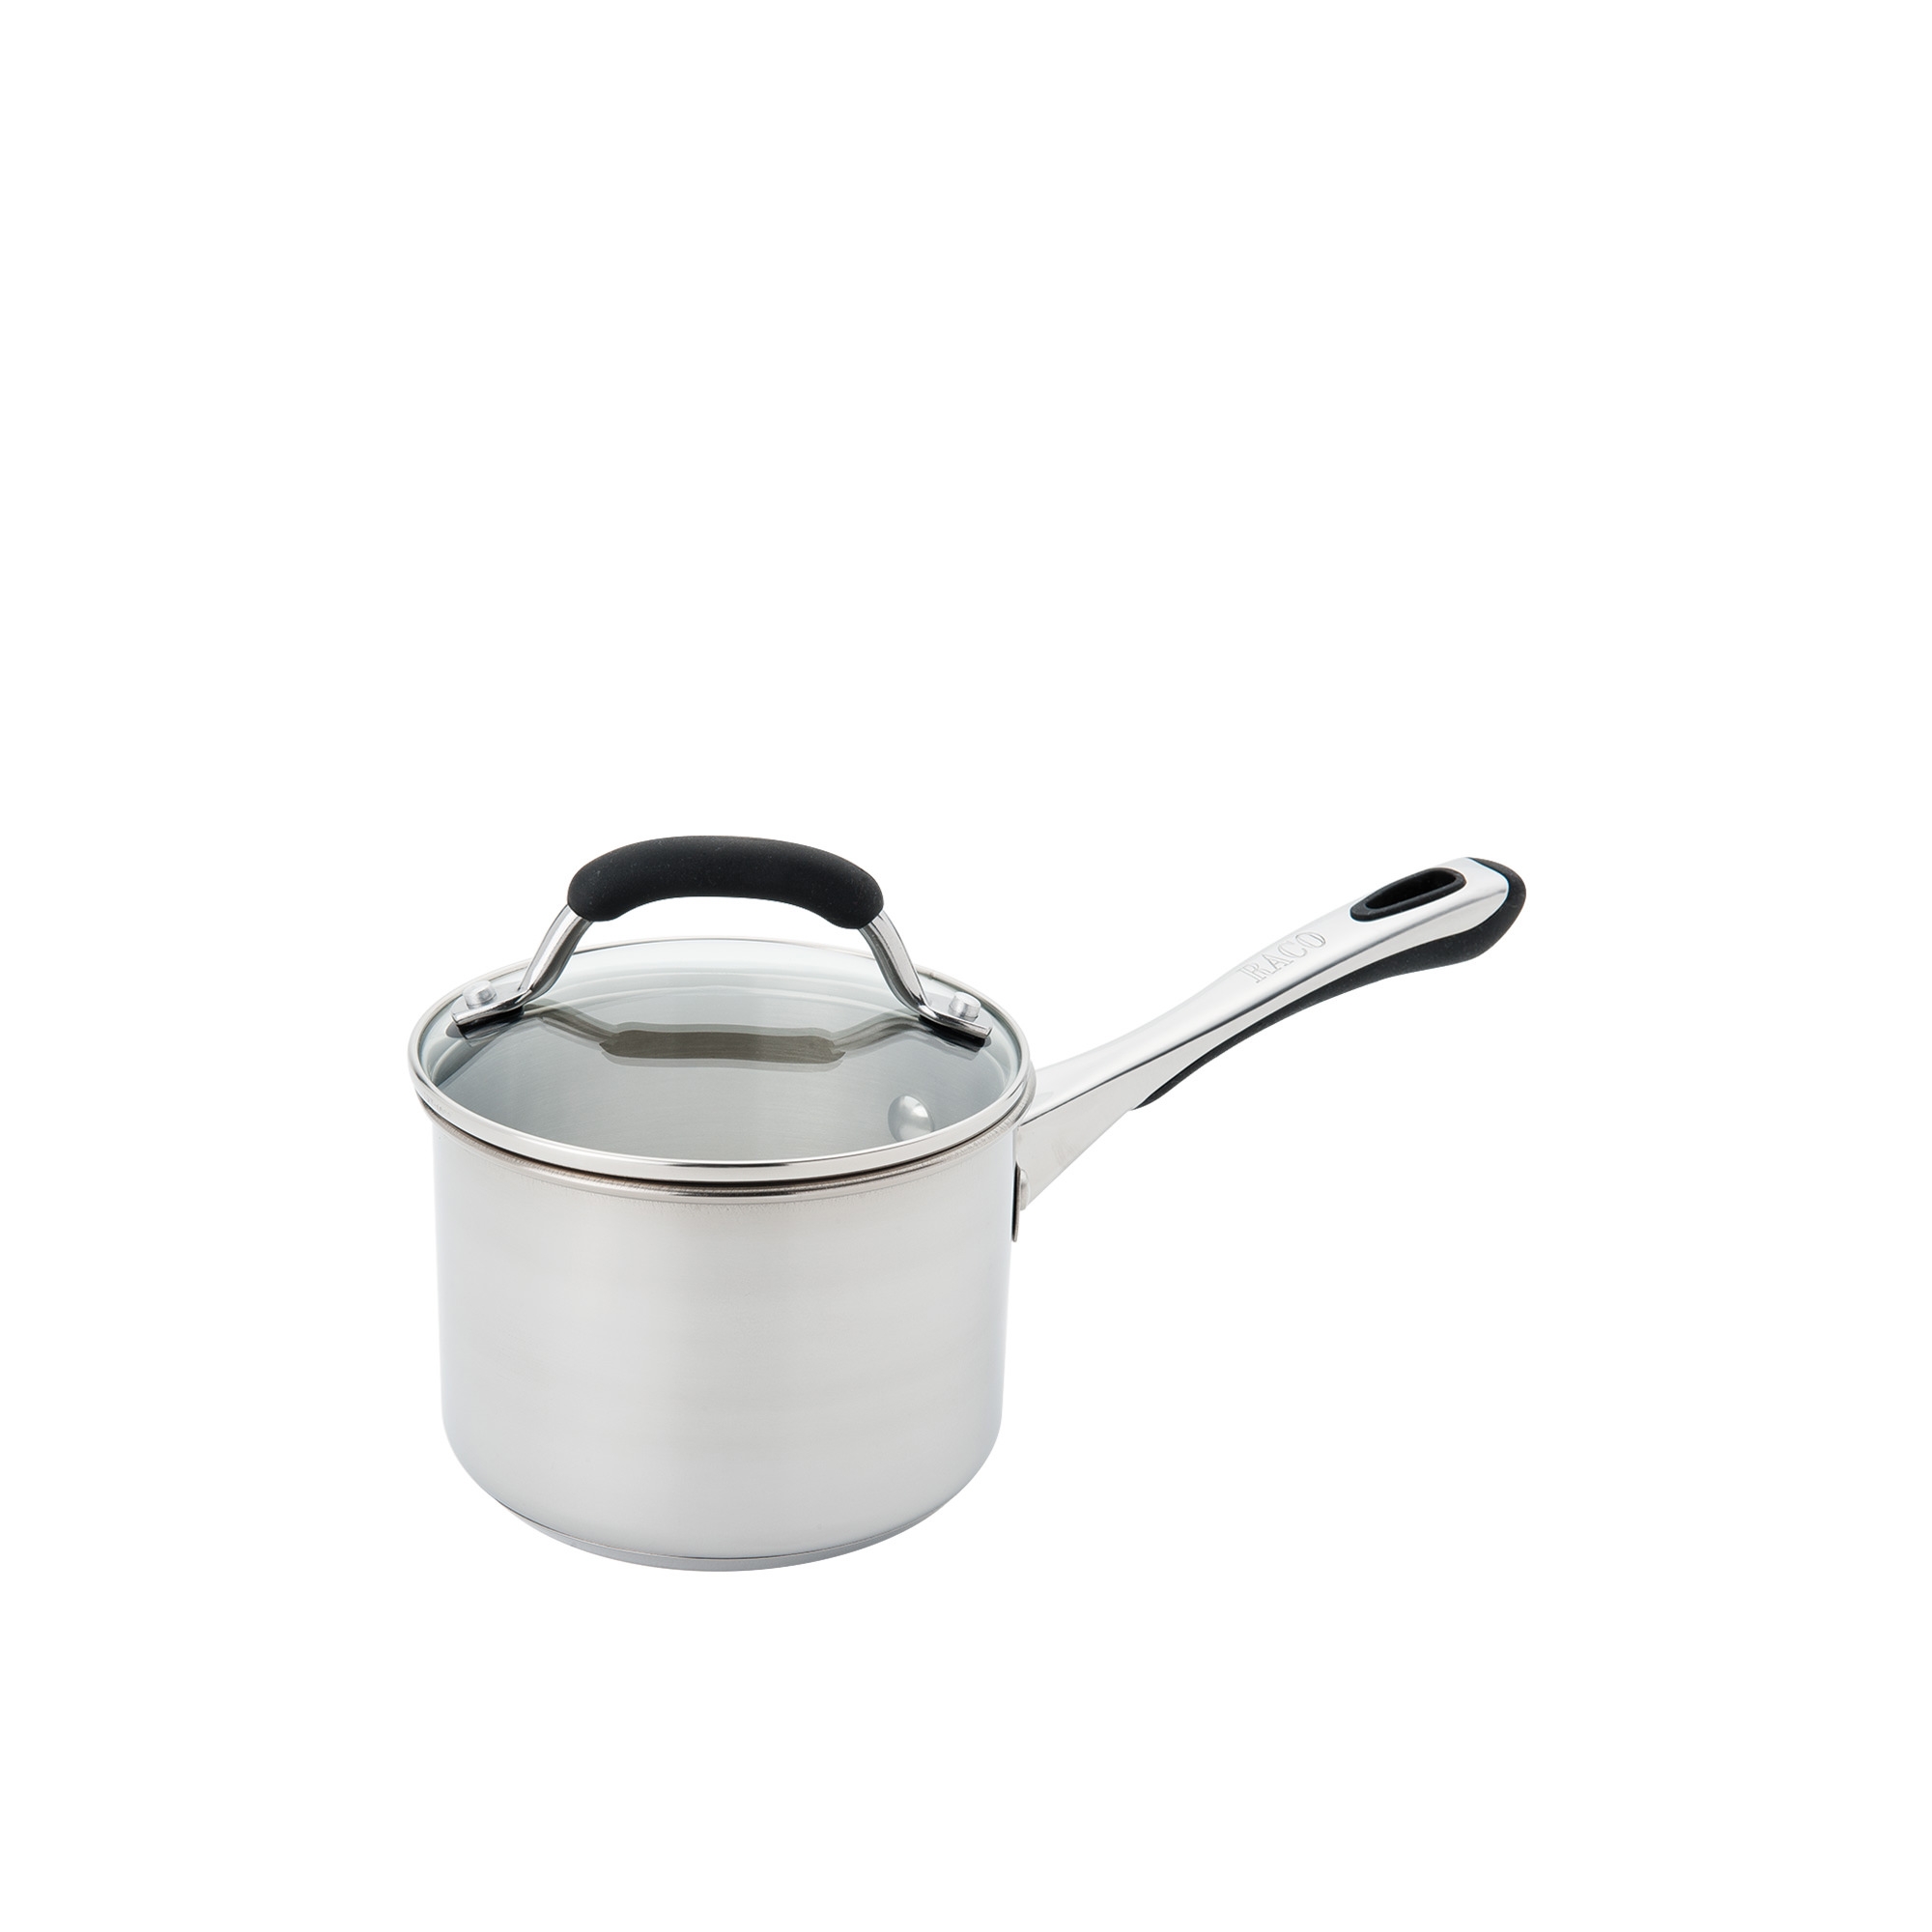 Raco Contemporary Stainless Steel Saucepan 16cm - 1.9L Image 1